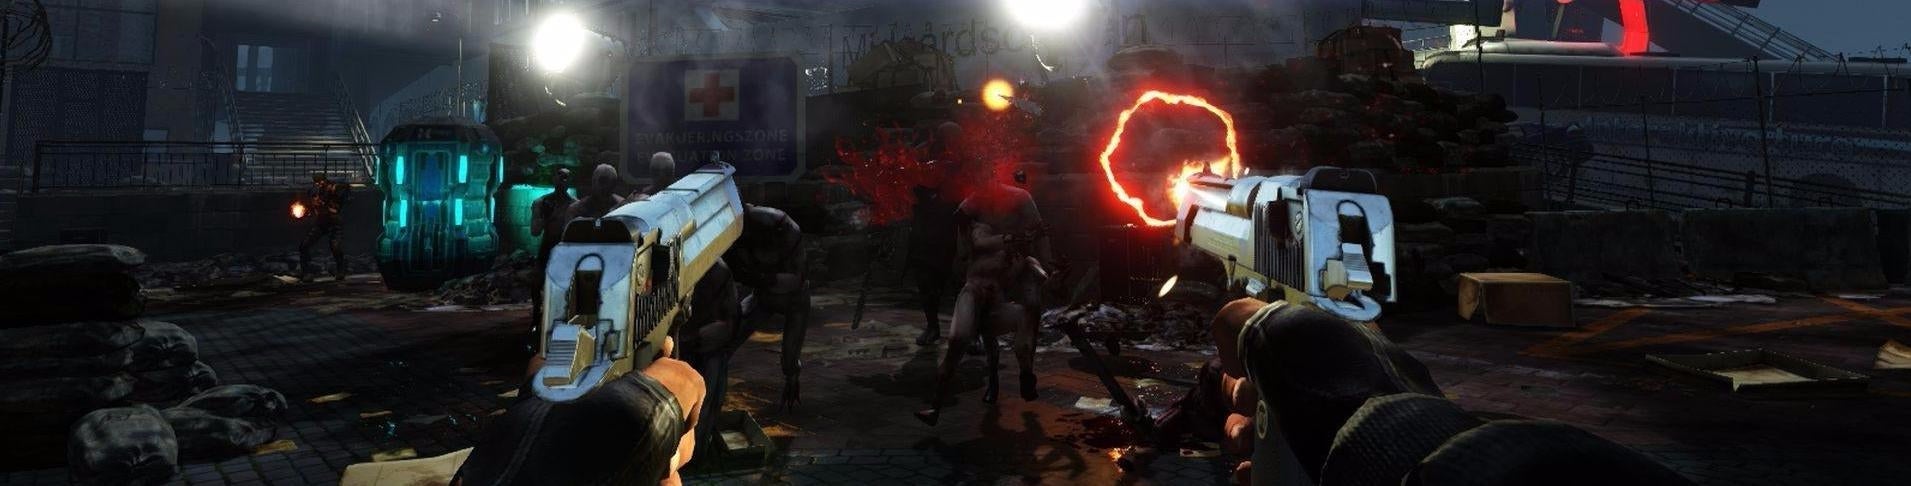 Image for Watch: Johnny and Ian play Killing Floor 2, bicker endlessly